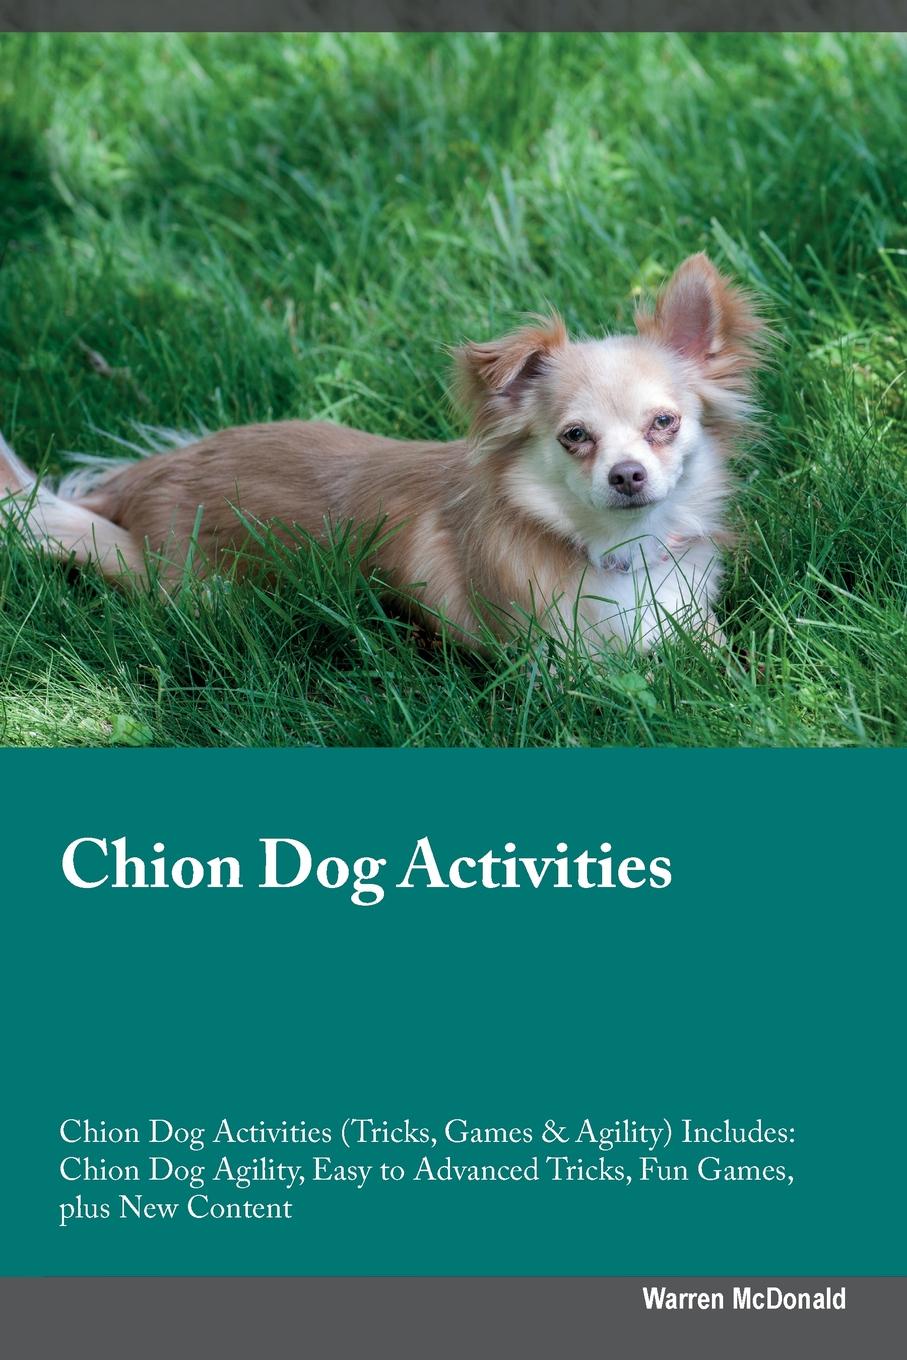 Chion Dog Activities Chion Dog Activities (Tricks, Games & Agility) Includes. Chion Dog Agility, Easy to Advanced Tricks, Fun Games, plus New Content